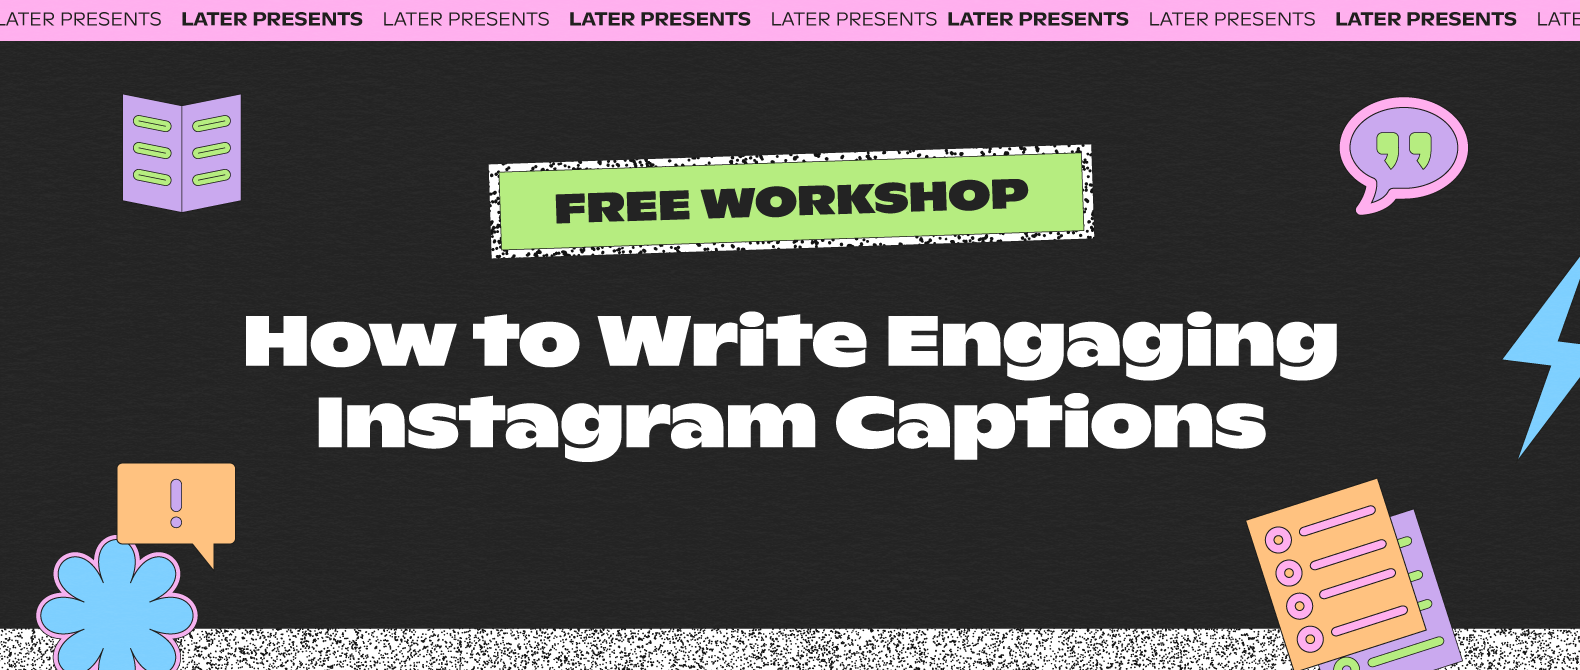 Thumbnail image with text Free Workshop: How to Write Engaging Instagram Captions on light blue background